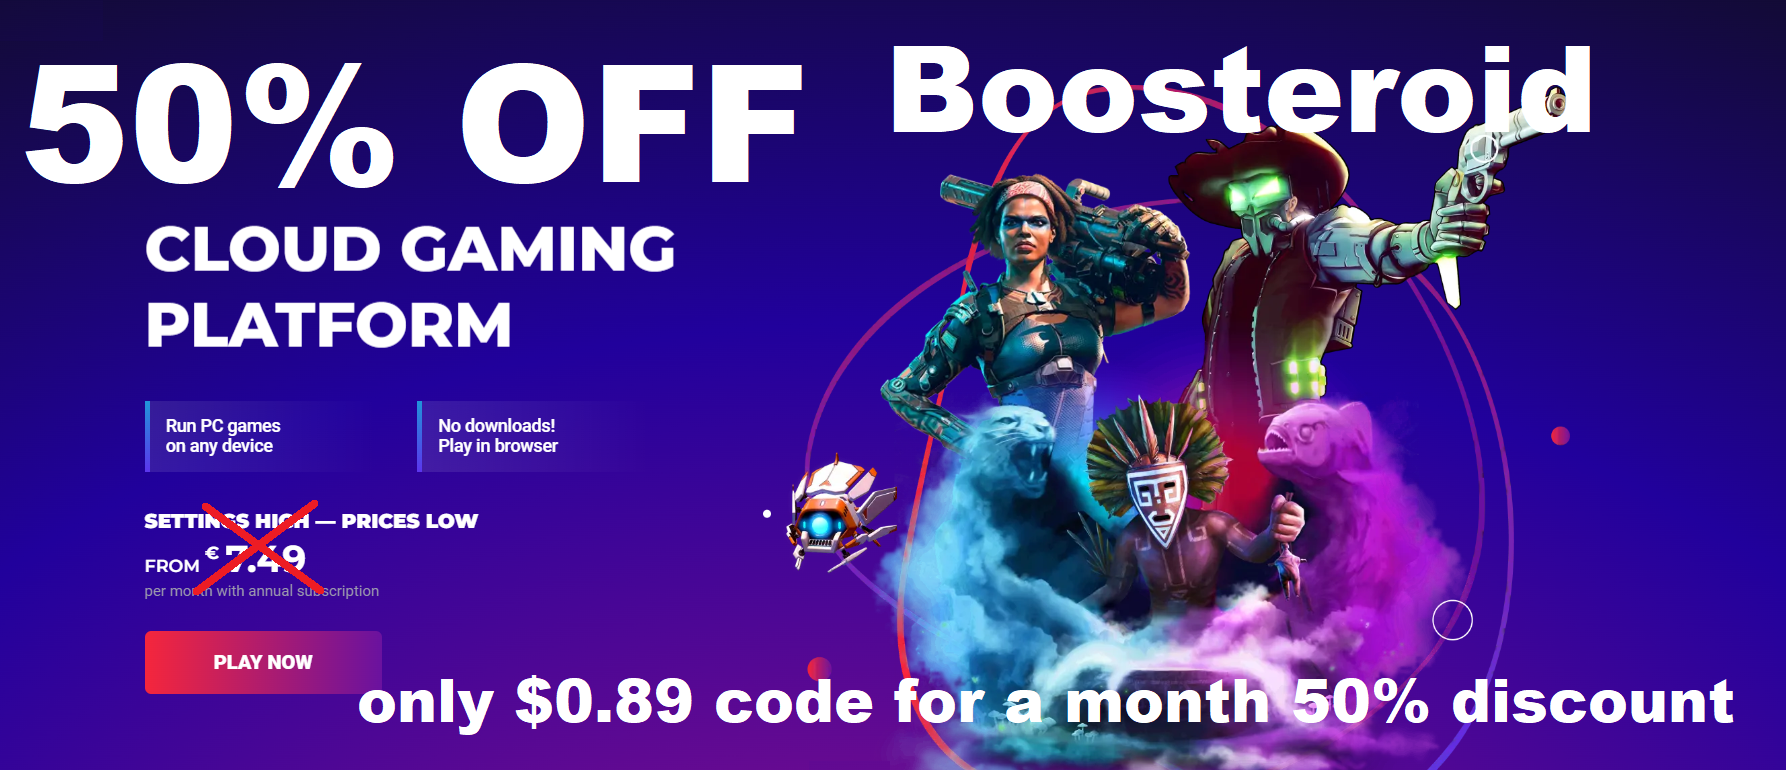 Boosteroid Cloud Gaming - 1 Month Subscription Key